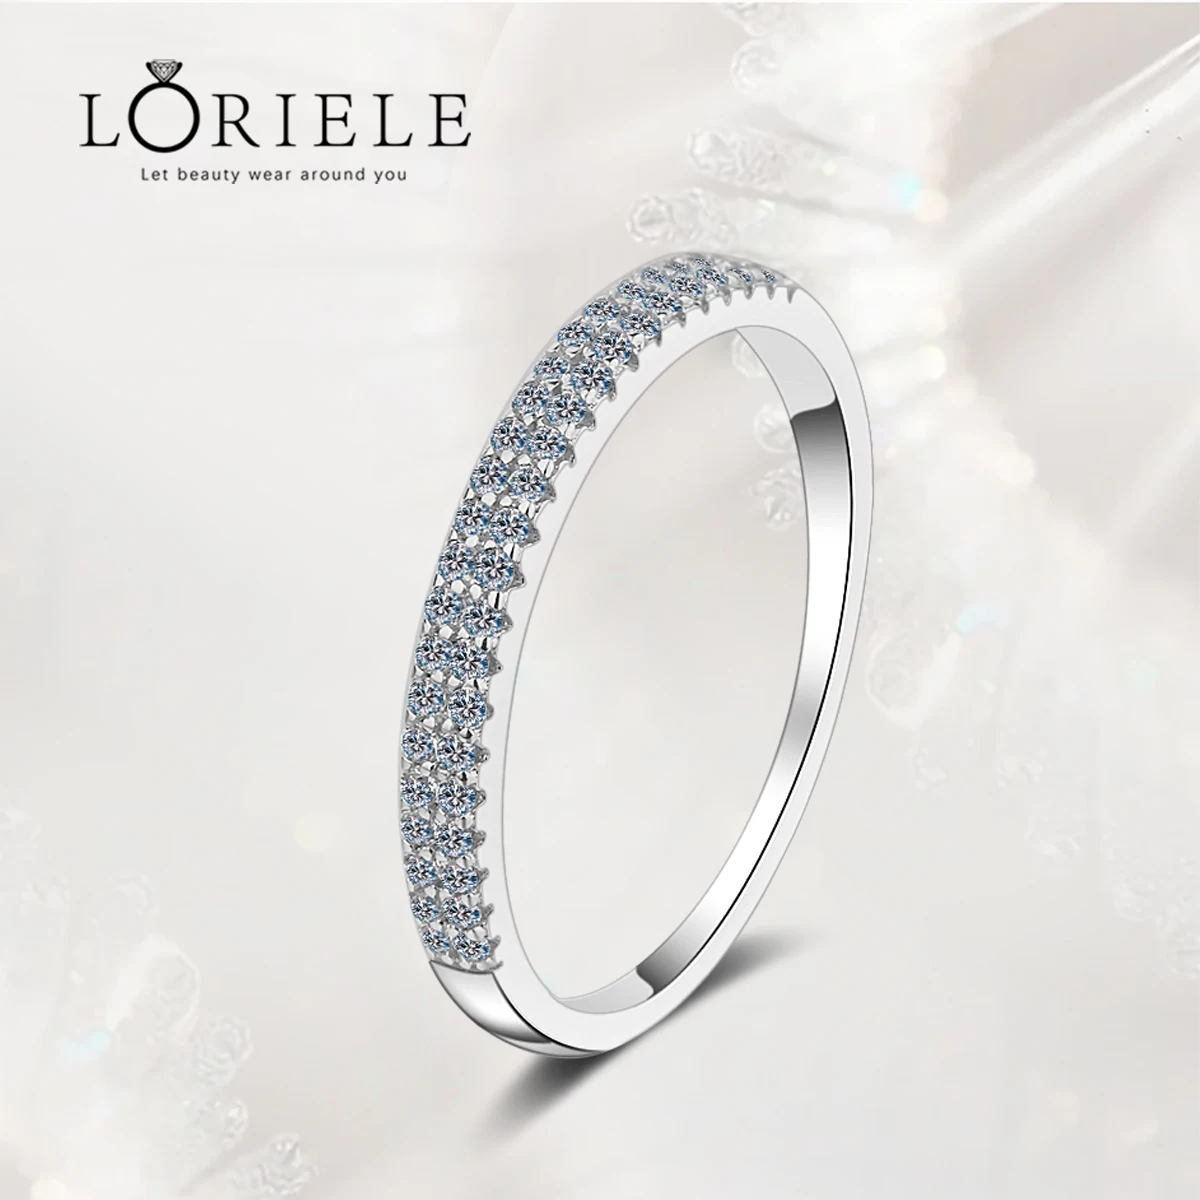 

LORIELE Moissanite Half Eternity Ring Sterling Silver Stackable Engagement Ring Small Sparckly Moissanites Diamond Wedding Bands